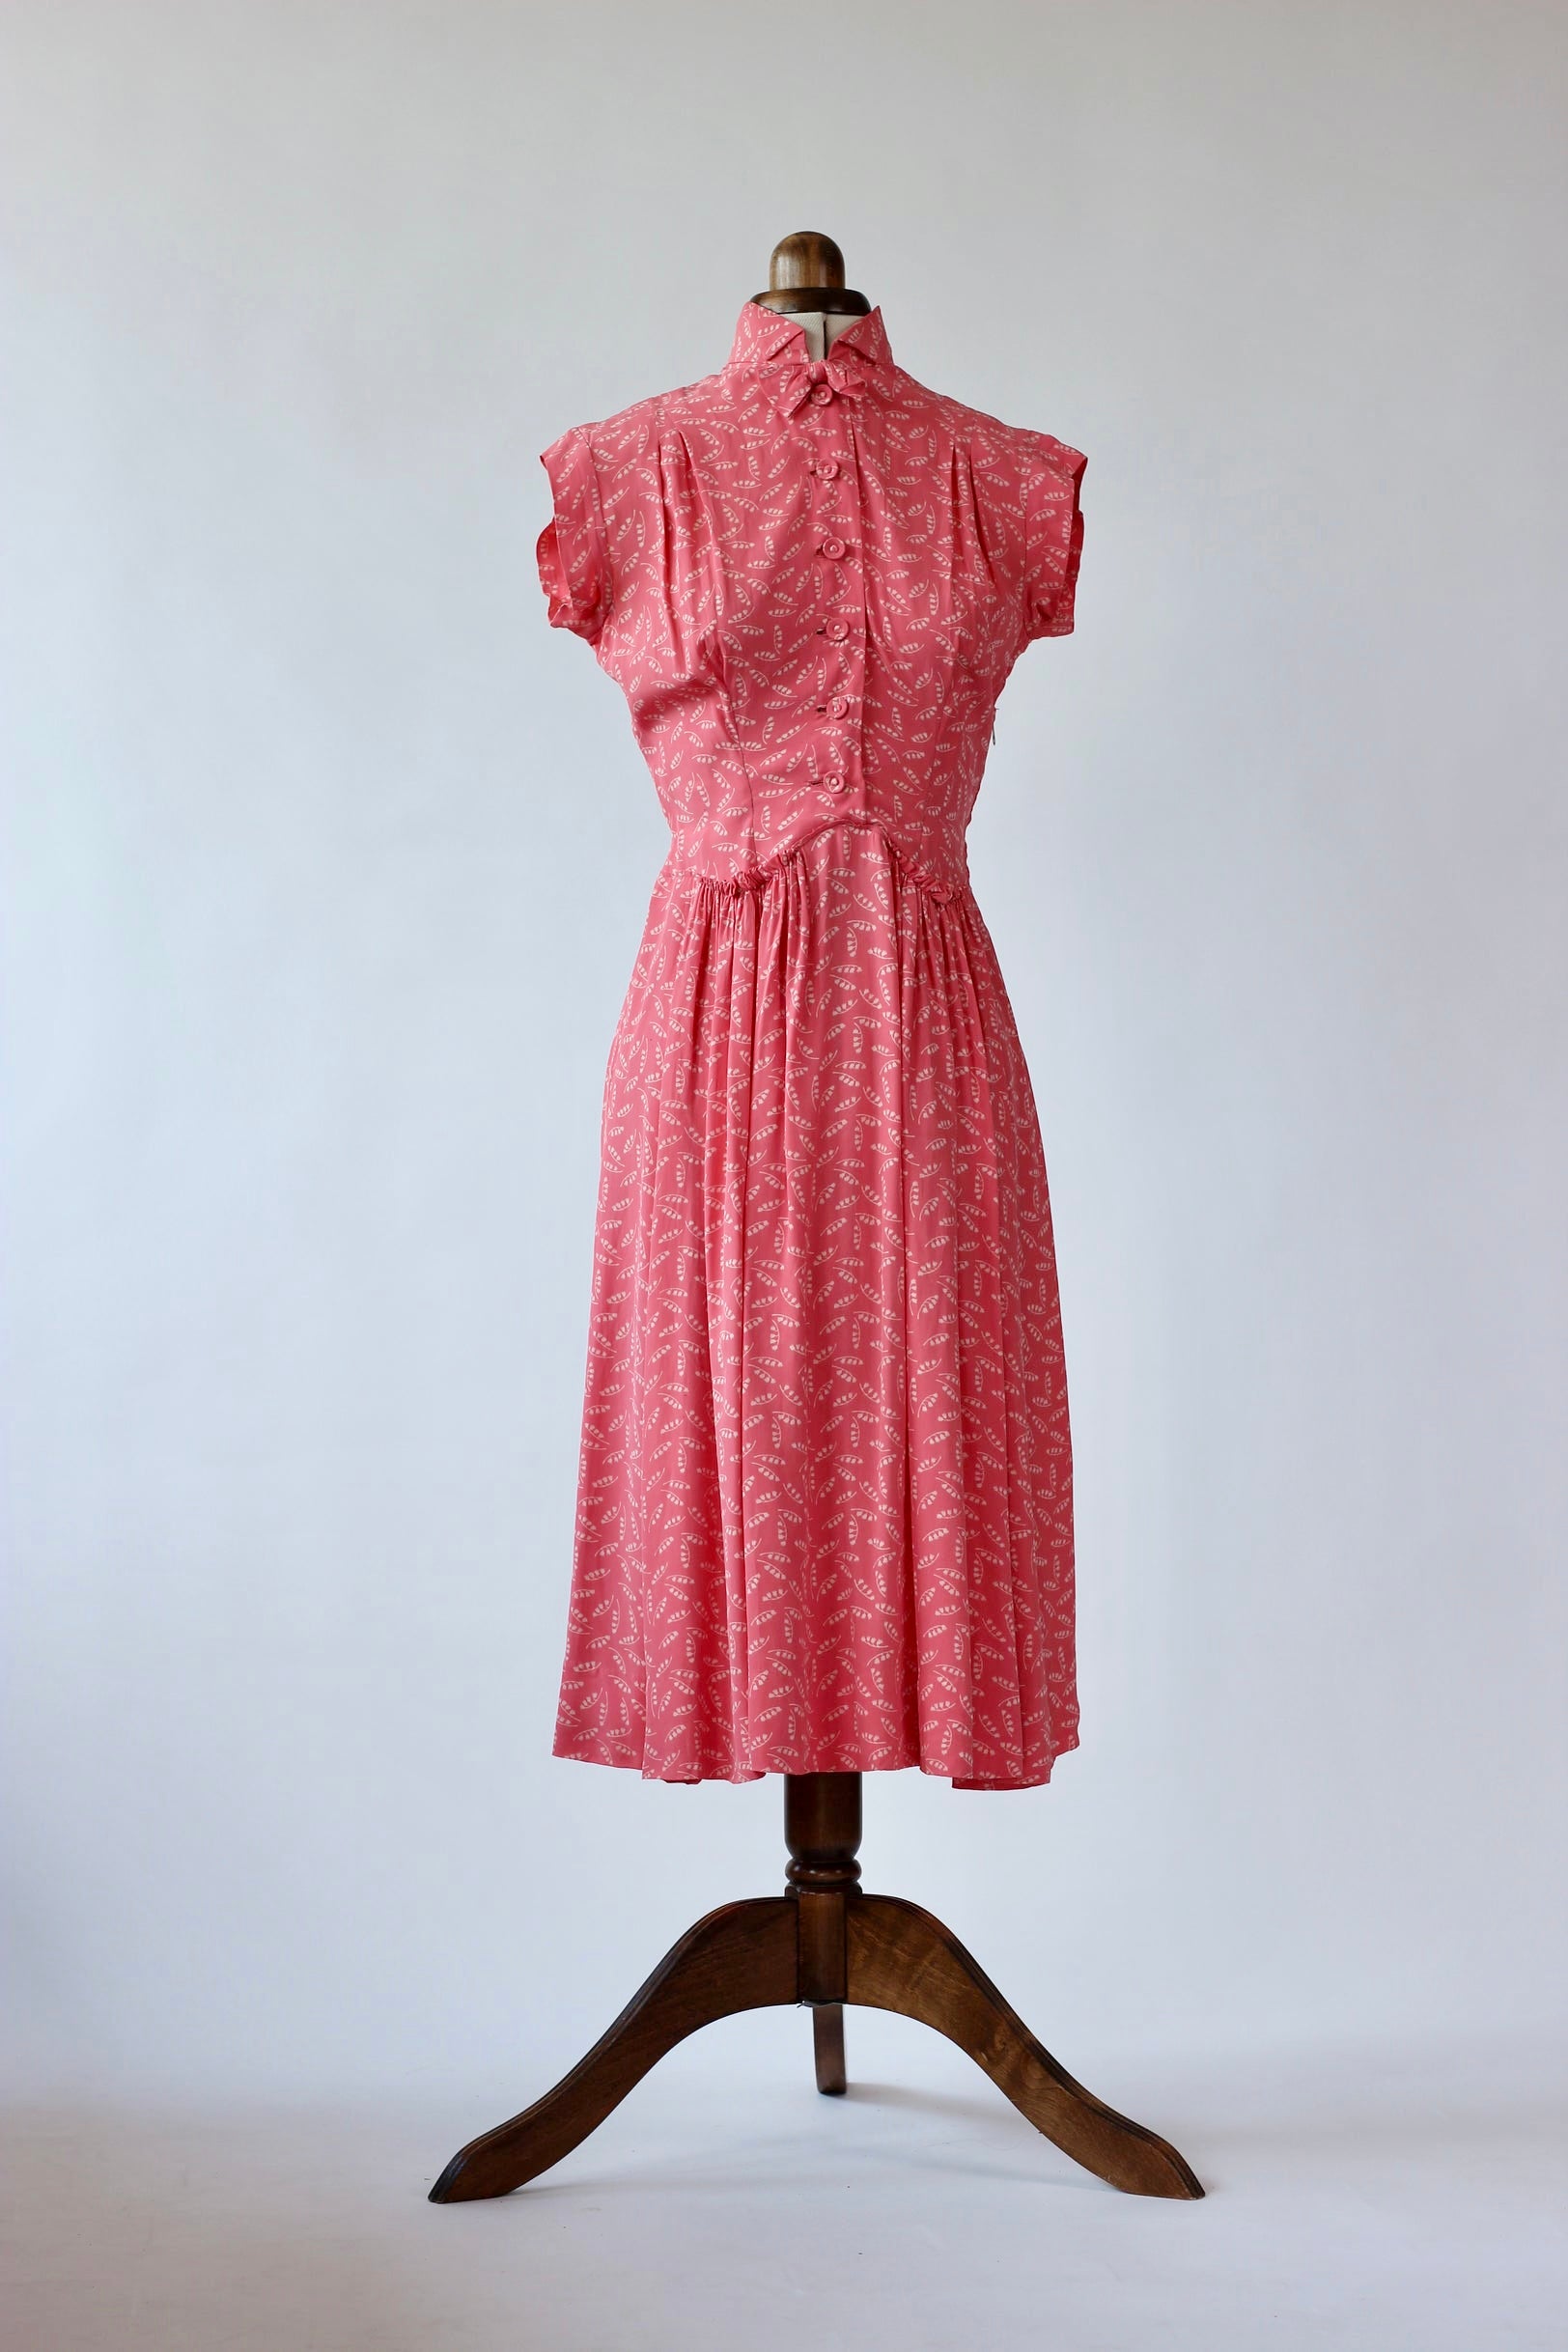 1940s Peach Novelty Print Dress with White Leaves//Size XS/S